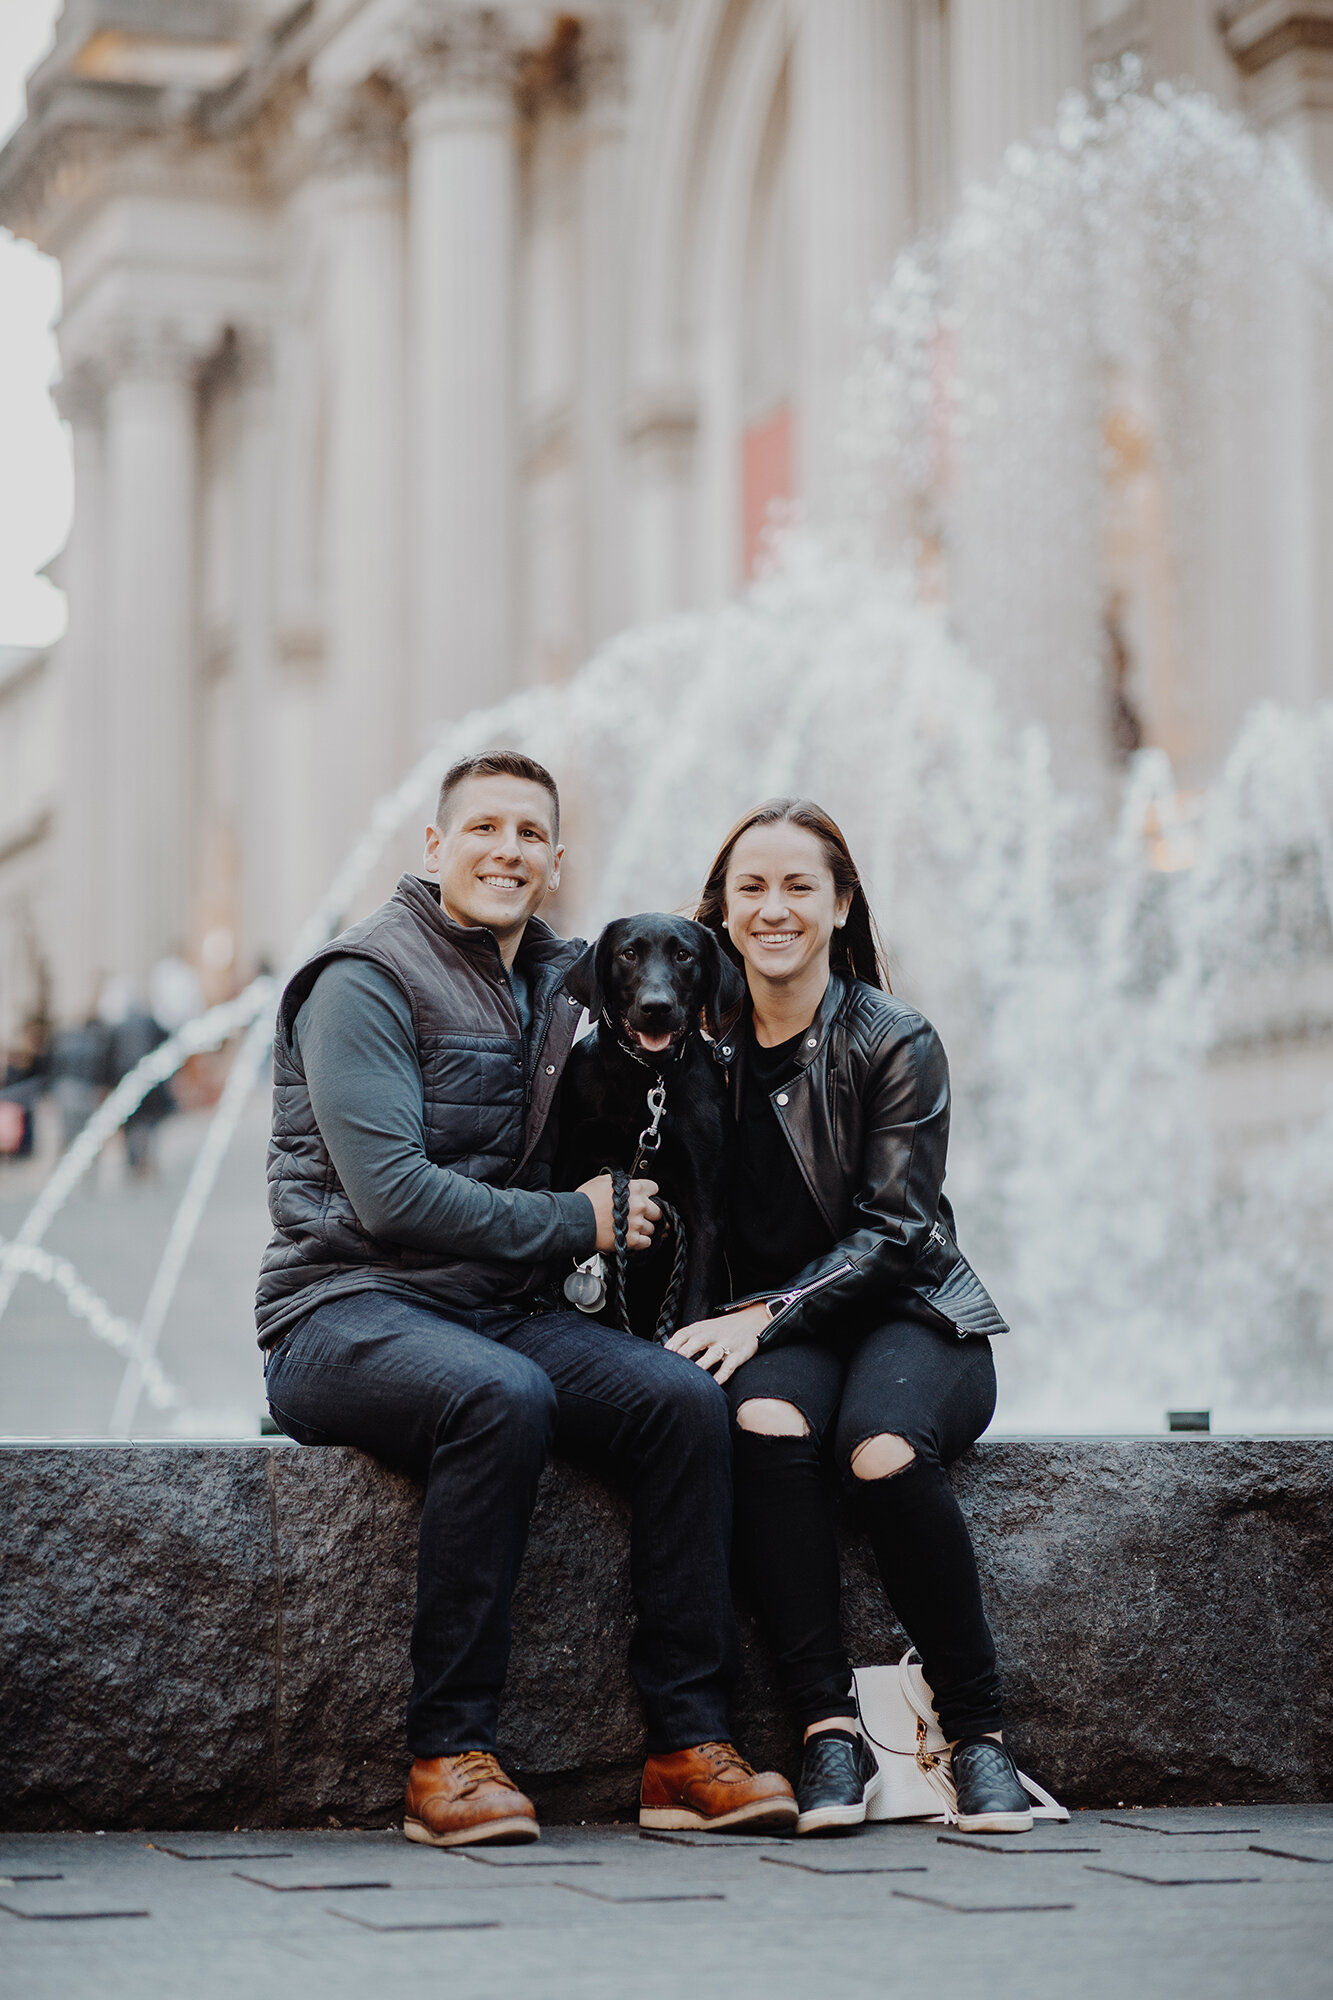 Picture-Perfect Secret Proposal Photos in Central Park NYC